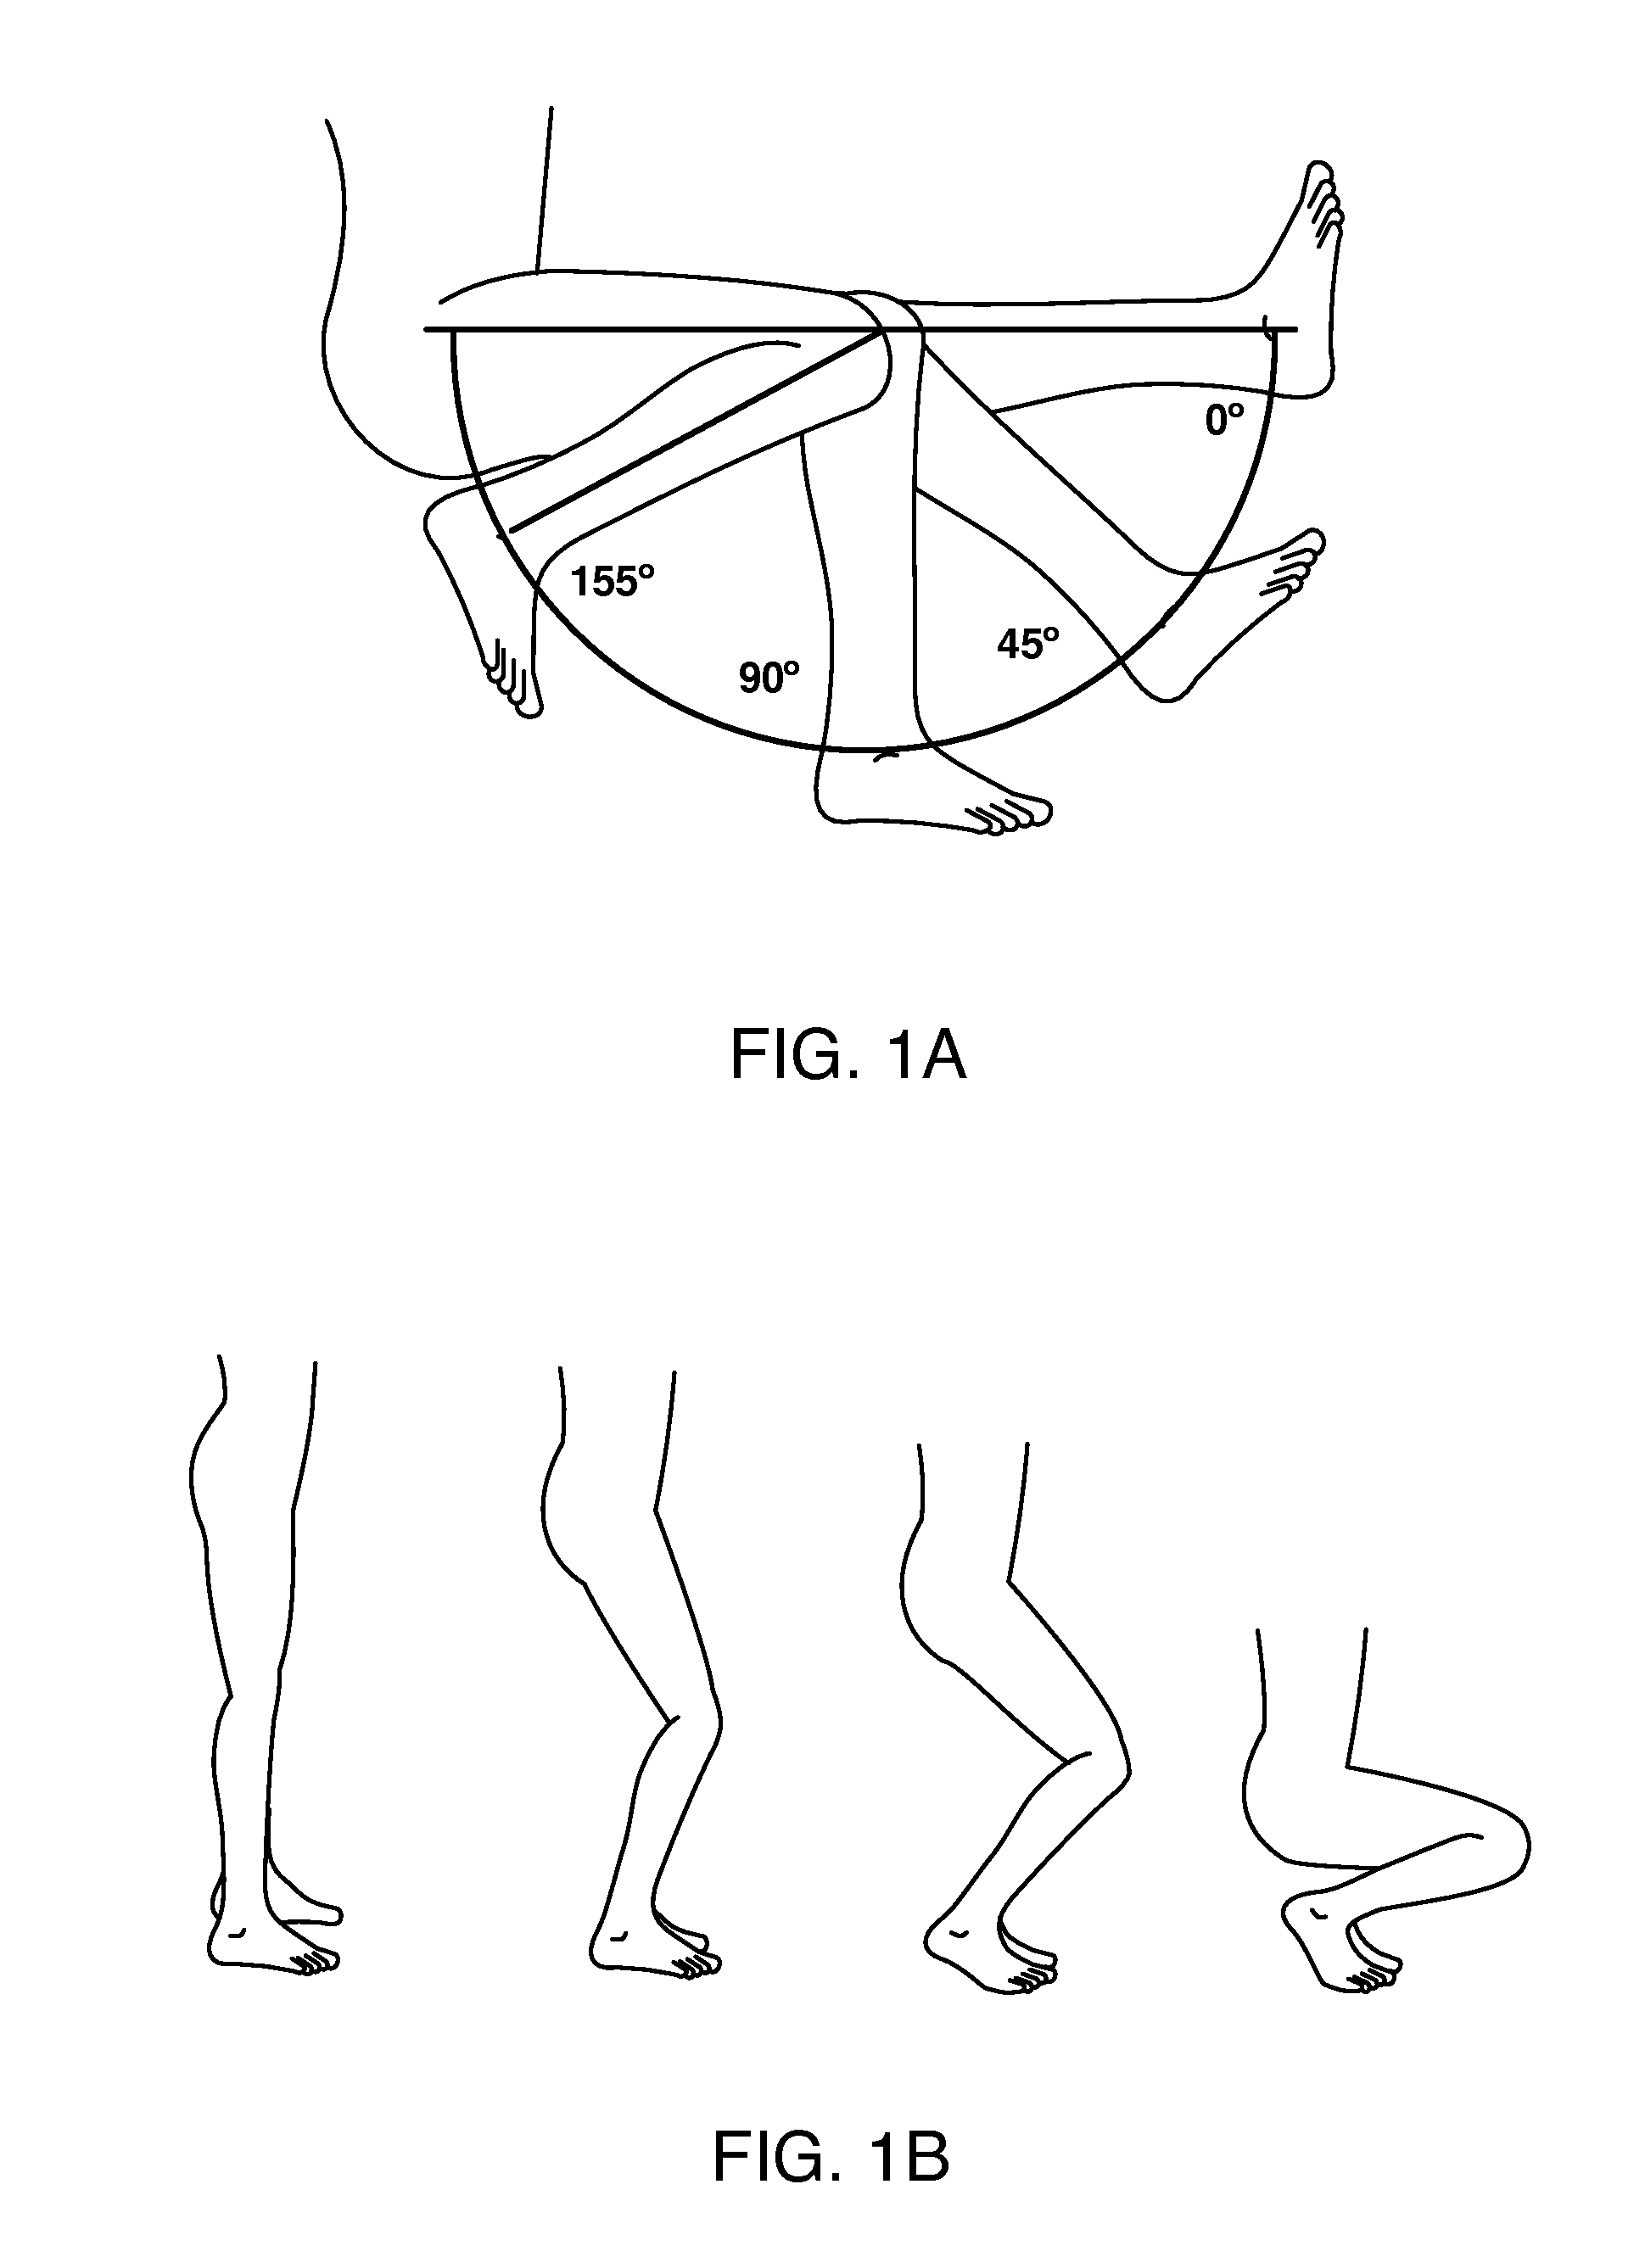 Systems and methods for providing an asymmetrical femoral component